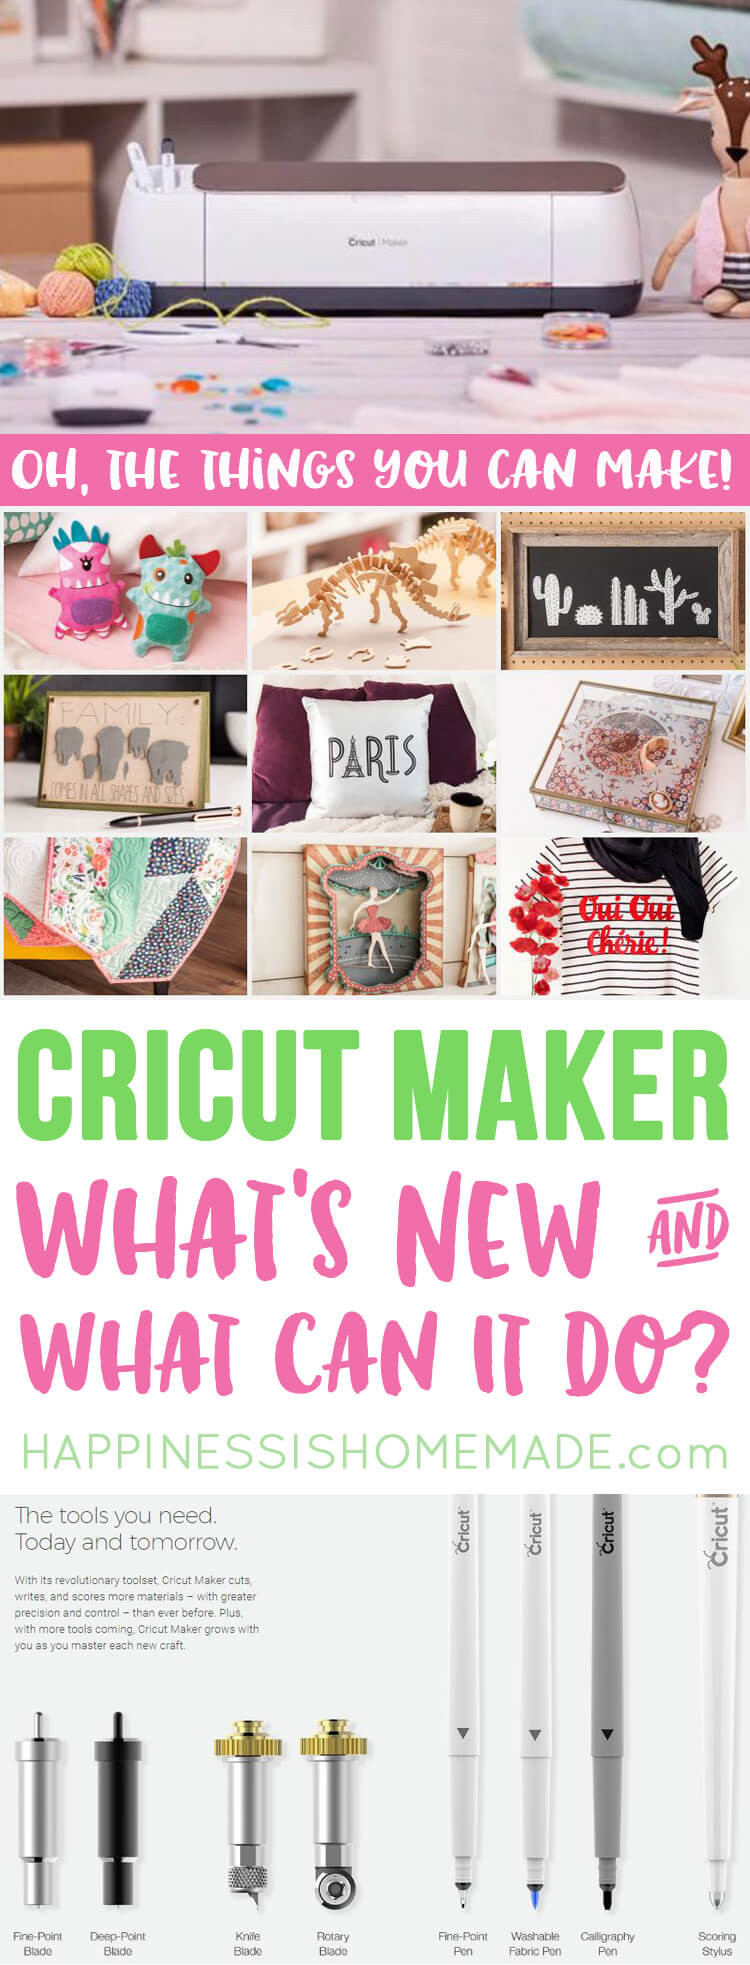 The Cricut Maker Machine - What's New and What Can It Do